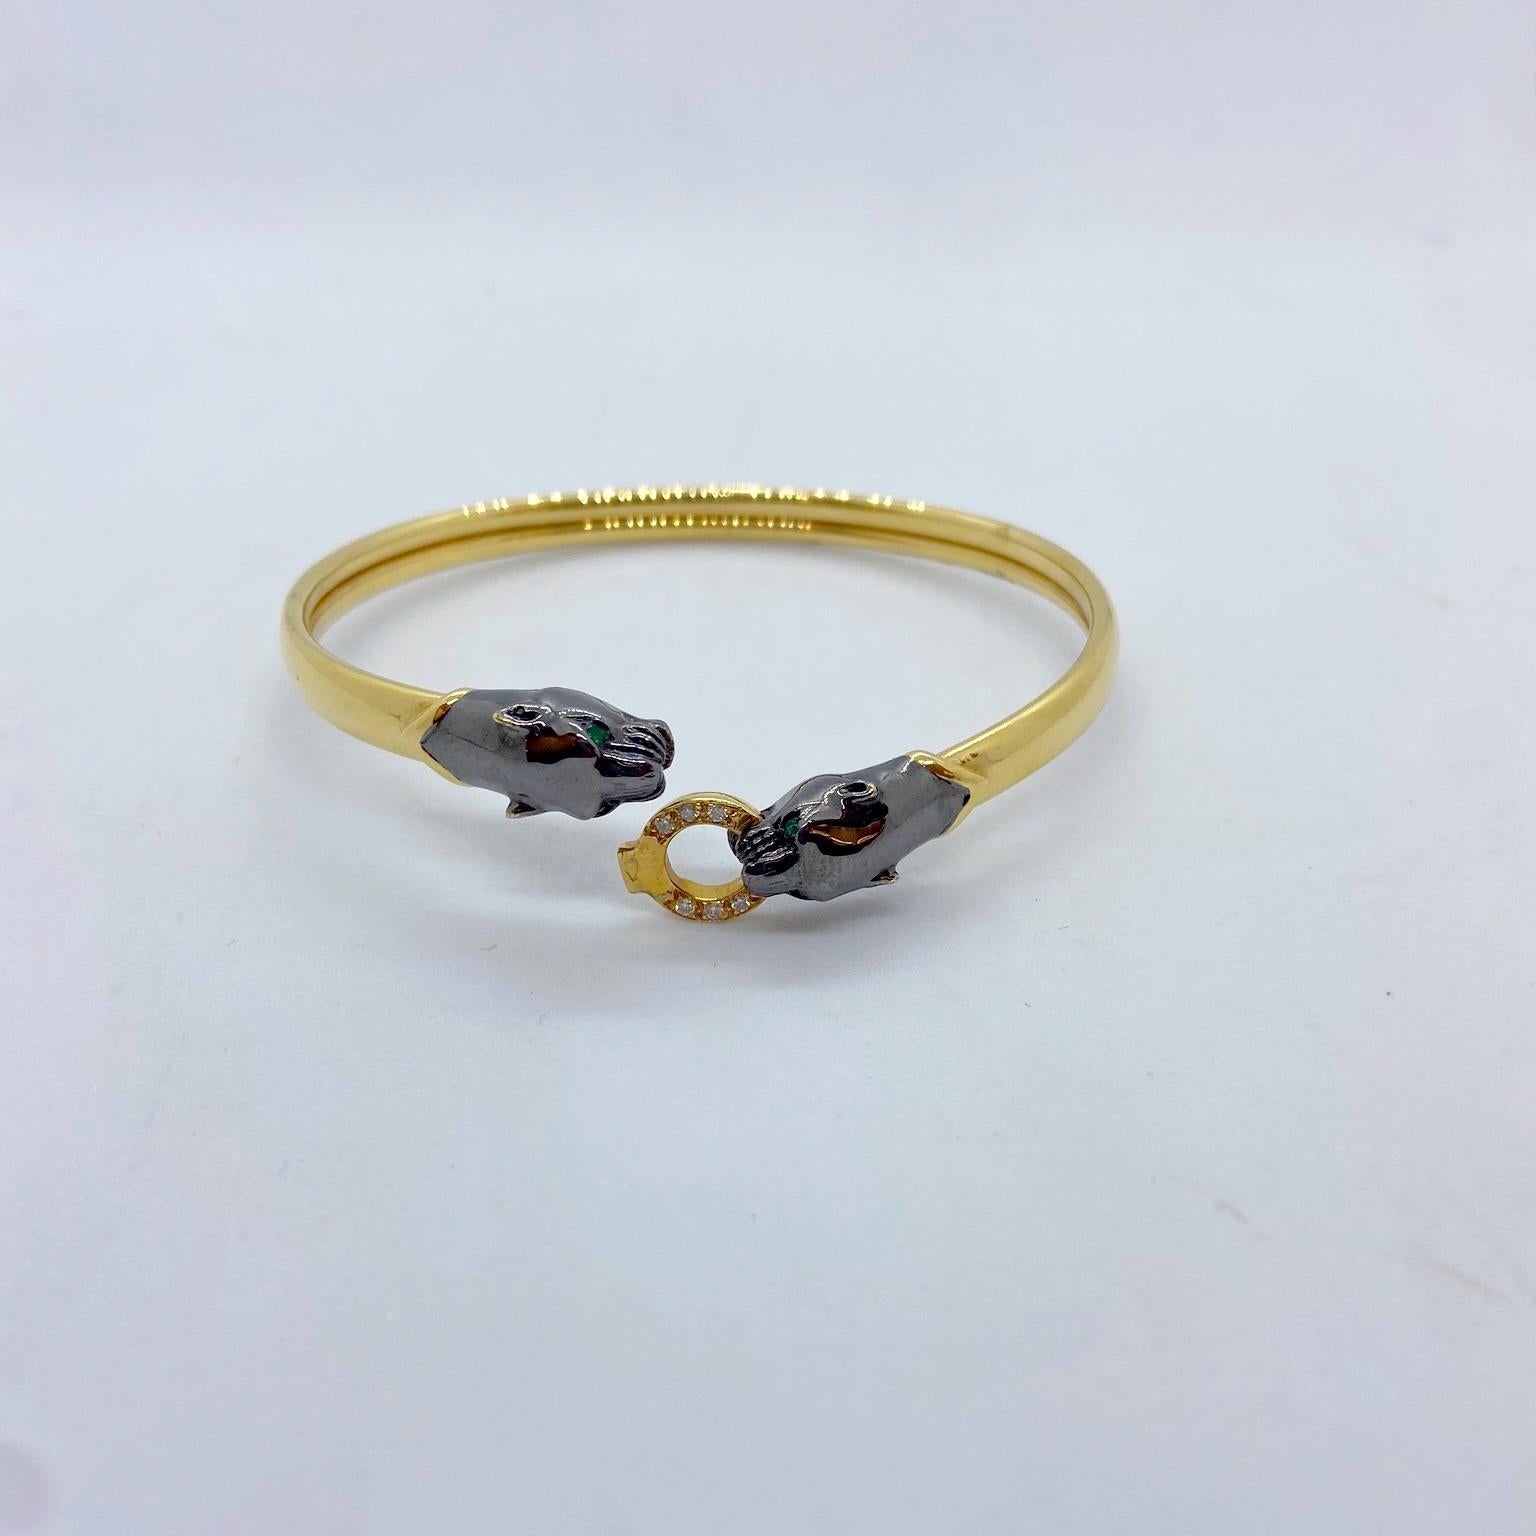 The bracelet is designed in 18 karat yellow gold with two blackened gold Panther heads. Each Panther has Emerald eyes. They hold a ring set with round brilliant Diamonds in their mouths. the bracelet unlocks at the top when the ring and mouth are